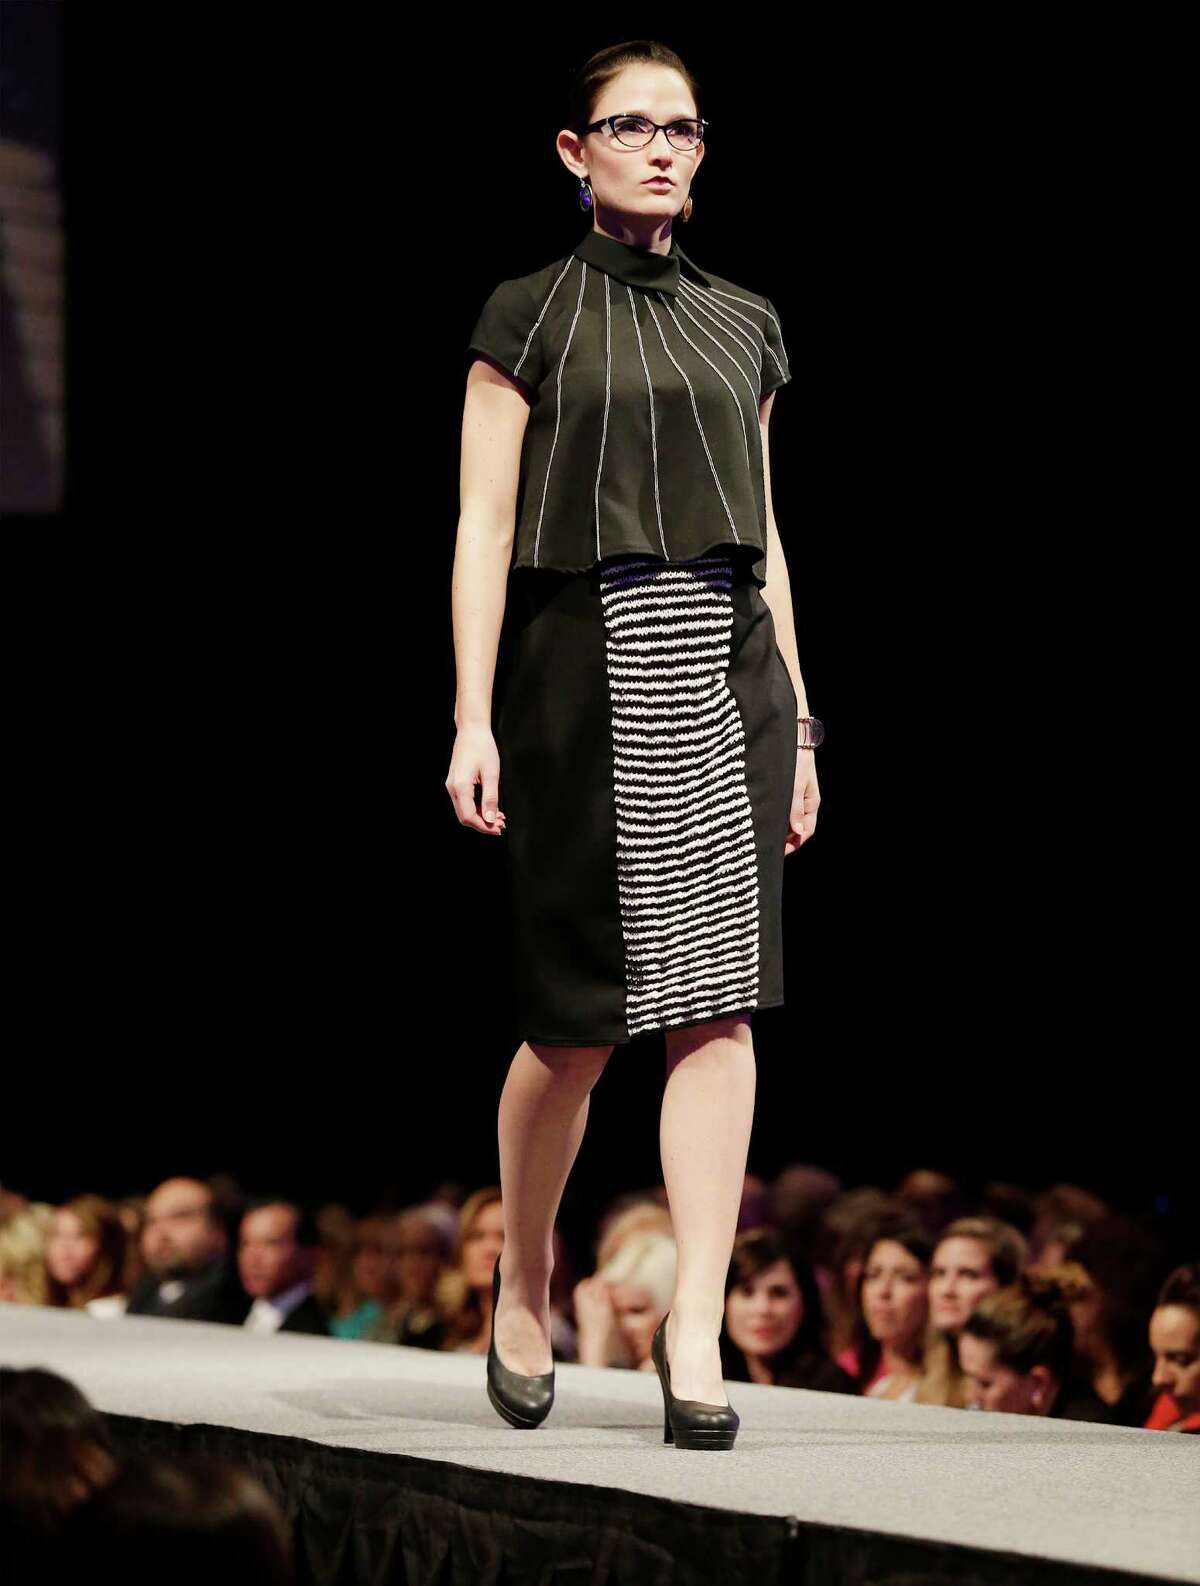 Clothing designs by University of the Incarnate Word student Kimberly Howard at the 2015 Cutting Edge Fiesta Fashion Show at the Tobin Center on Tuesday, Apr. 14, 2015.